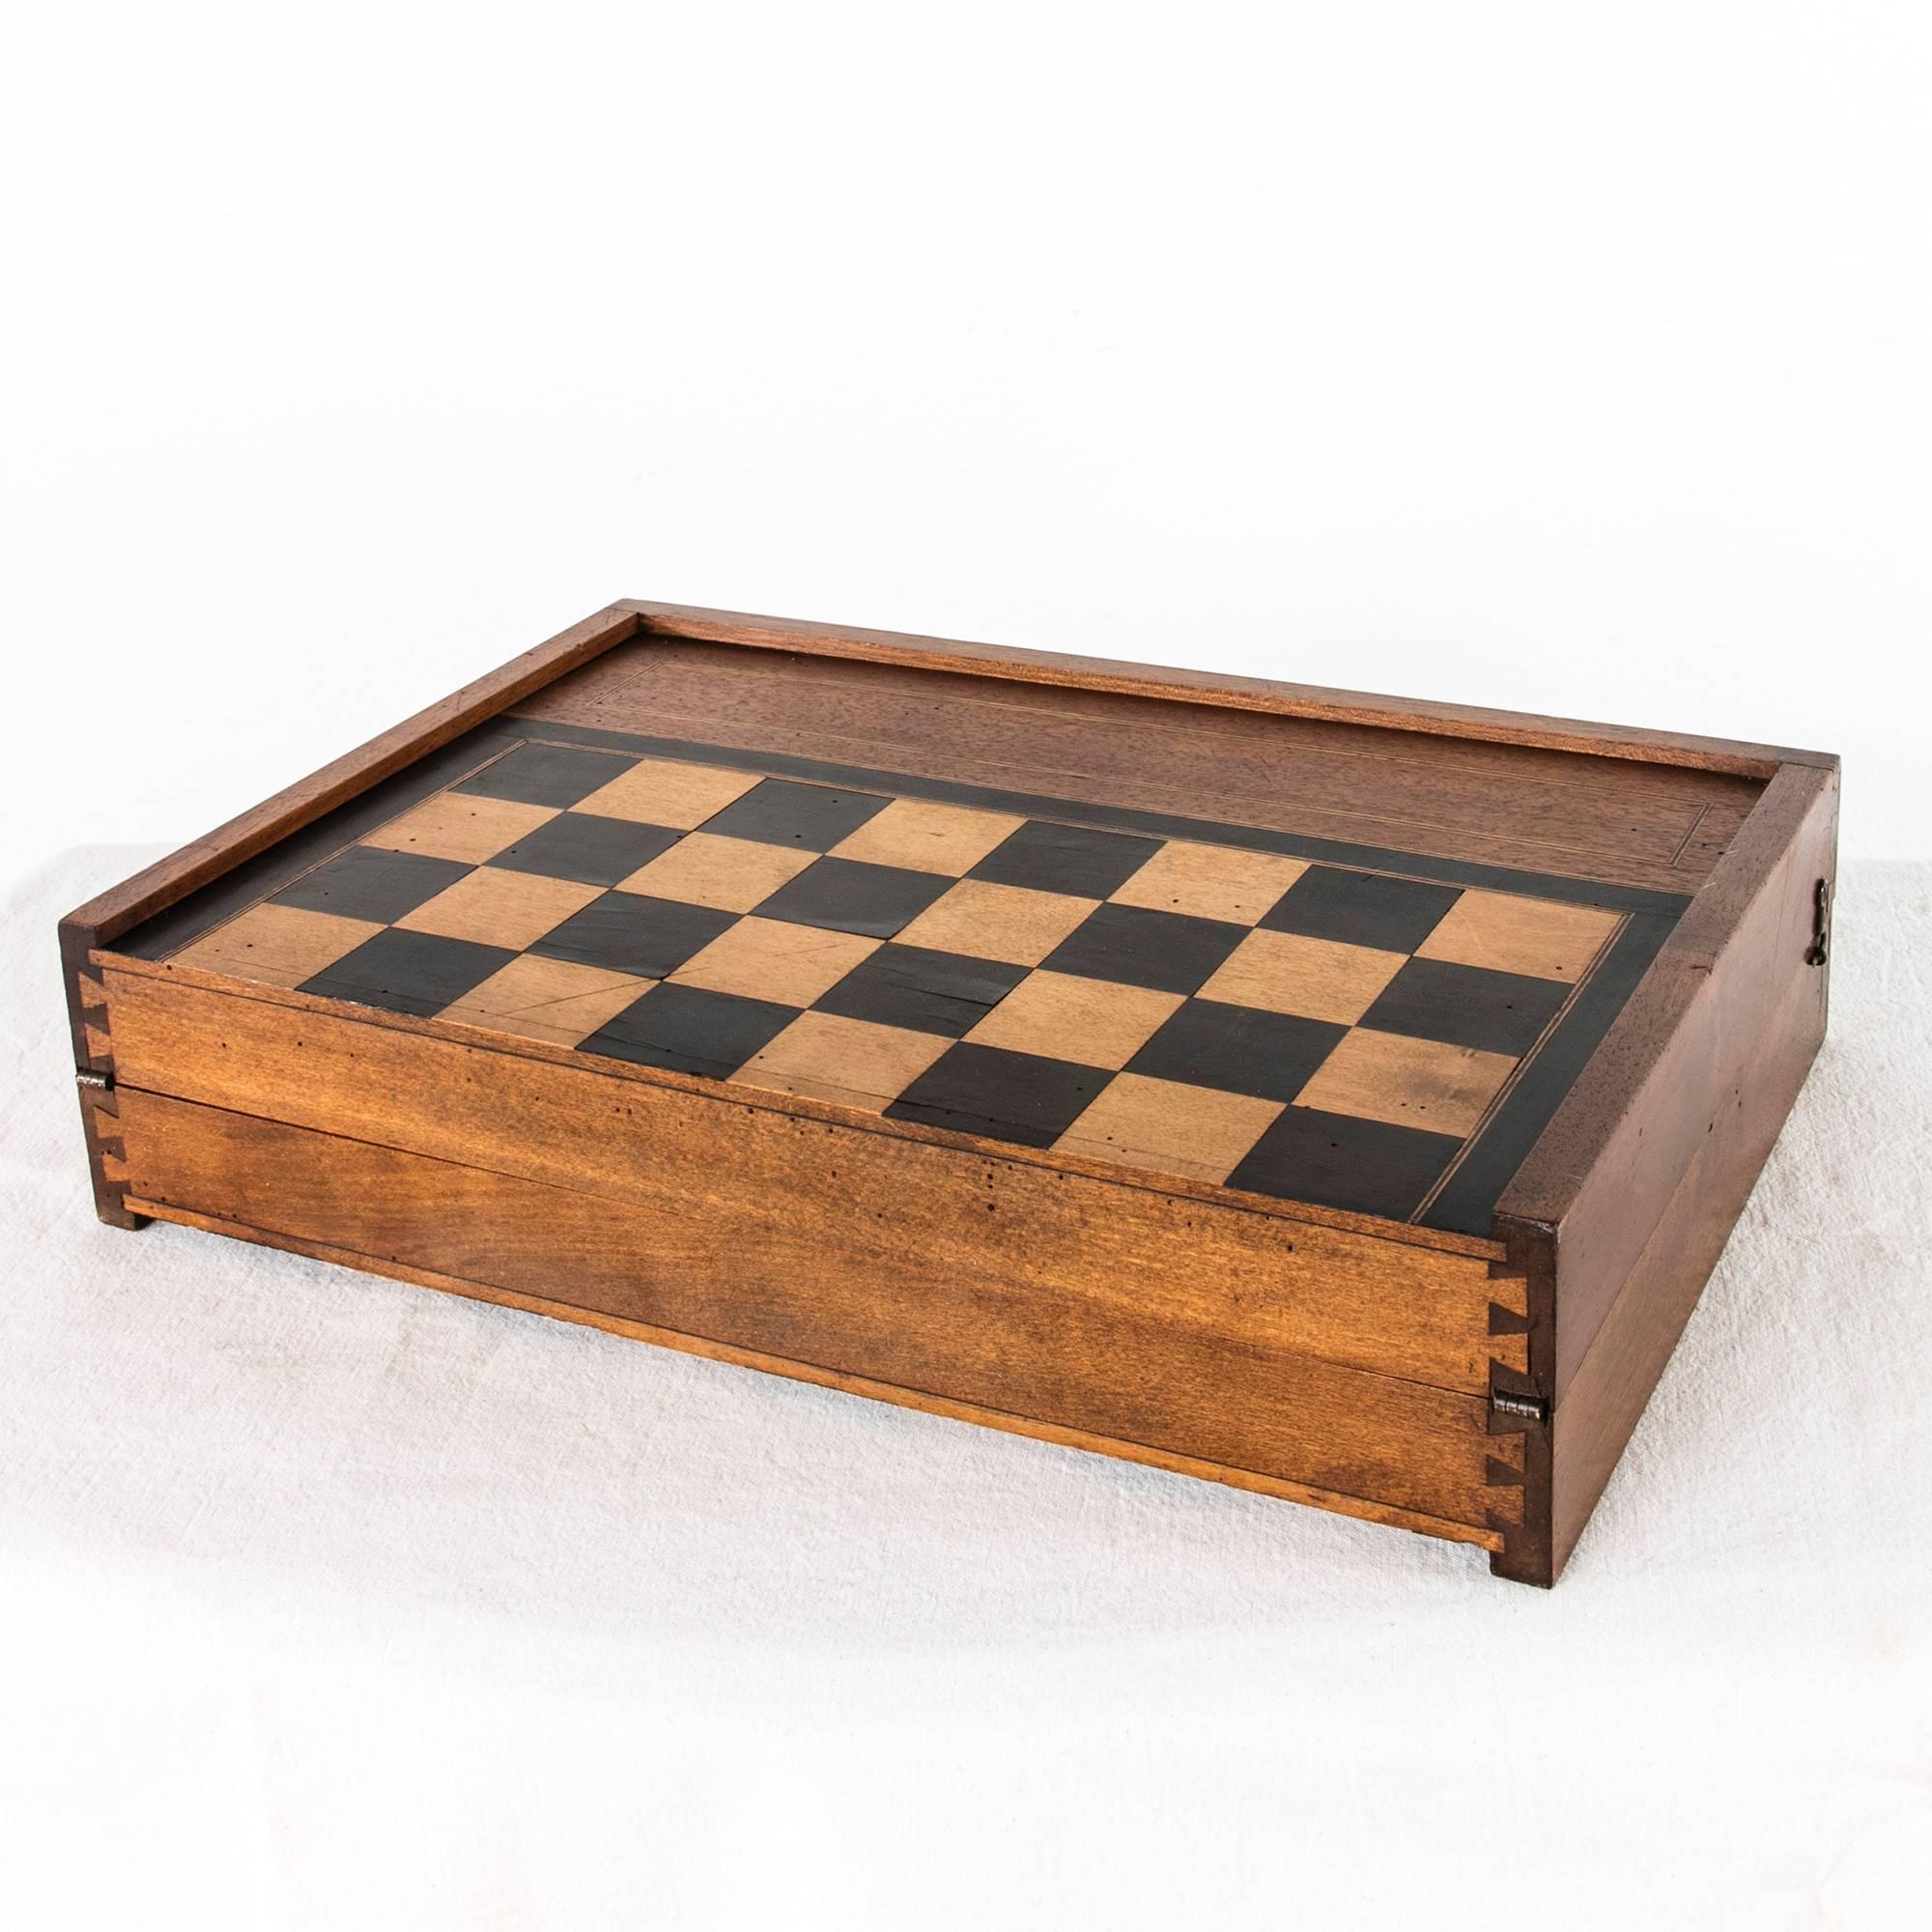 Wood Antique French Parquetry Game Board Box for Checkers, Chess, or Backgammon